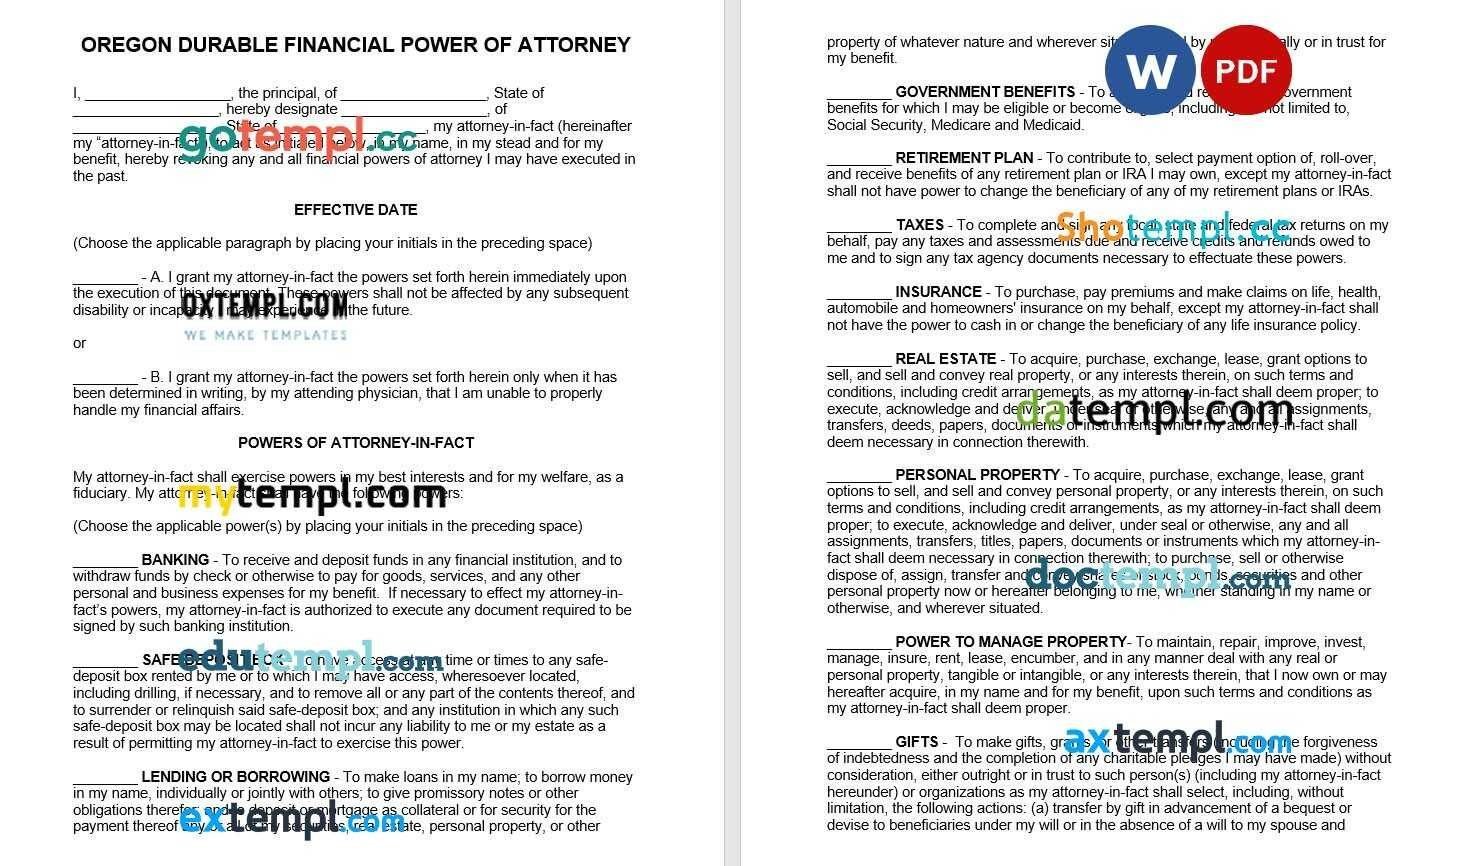 New Hampshire Real Estate Power of Attorney Form example, fully editable